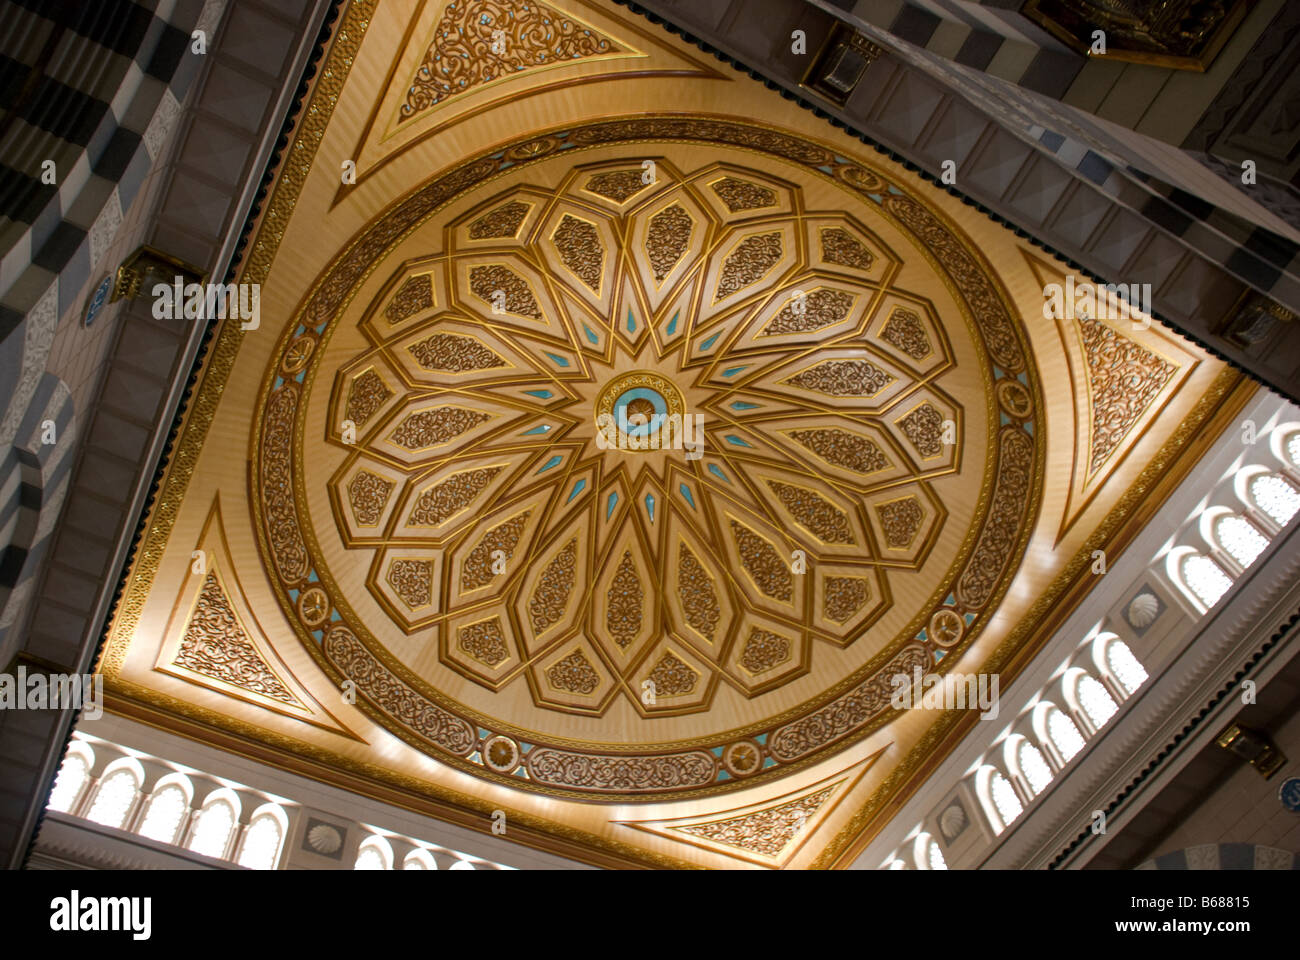 Masjid al nabawi ceiling hi-res stock photography and images - Alamy